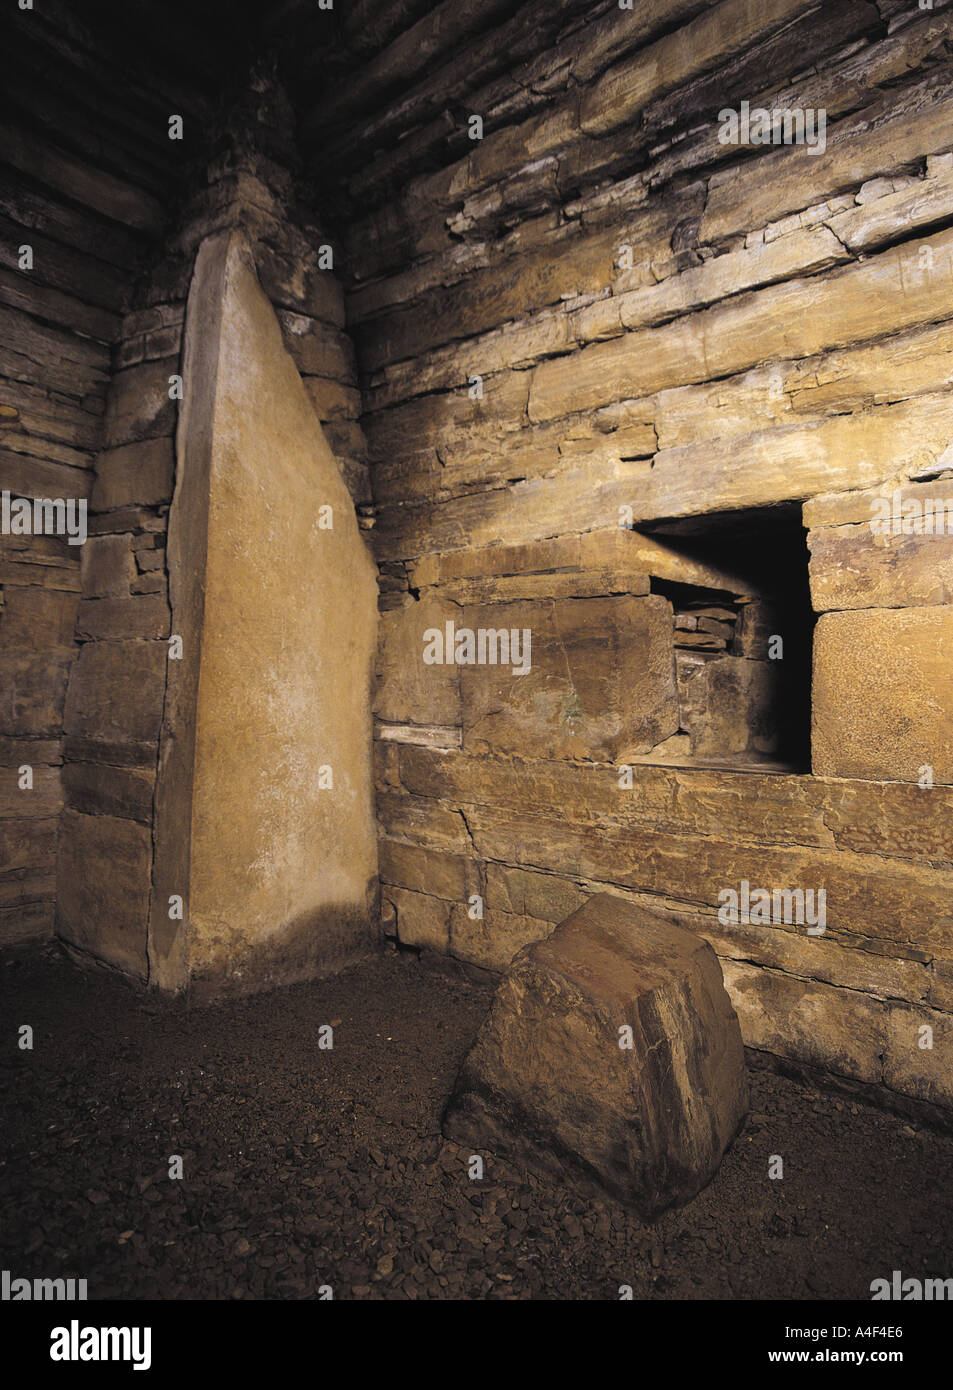 dh Burial Chamber MAESHOWE ORKNEY Neolithic tomb block stone chamber interior scotland chambered cairn mound Stock Photo